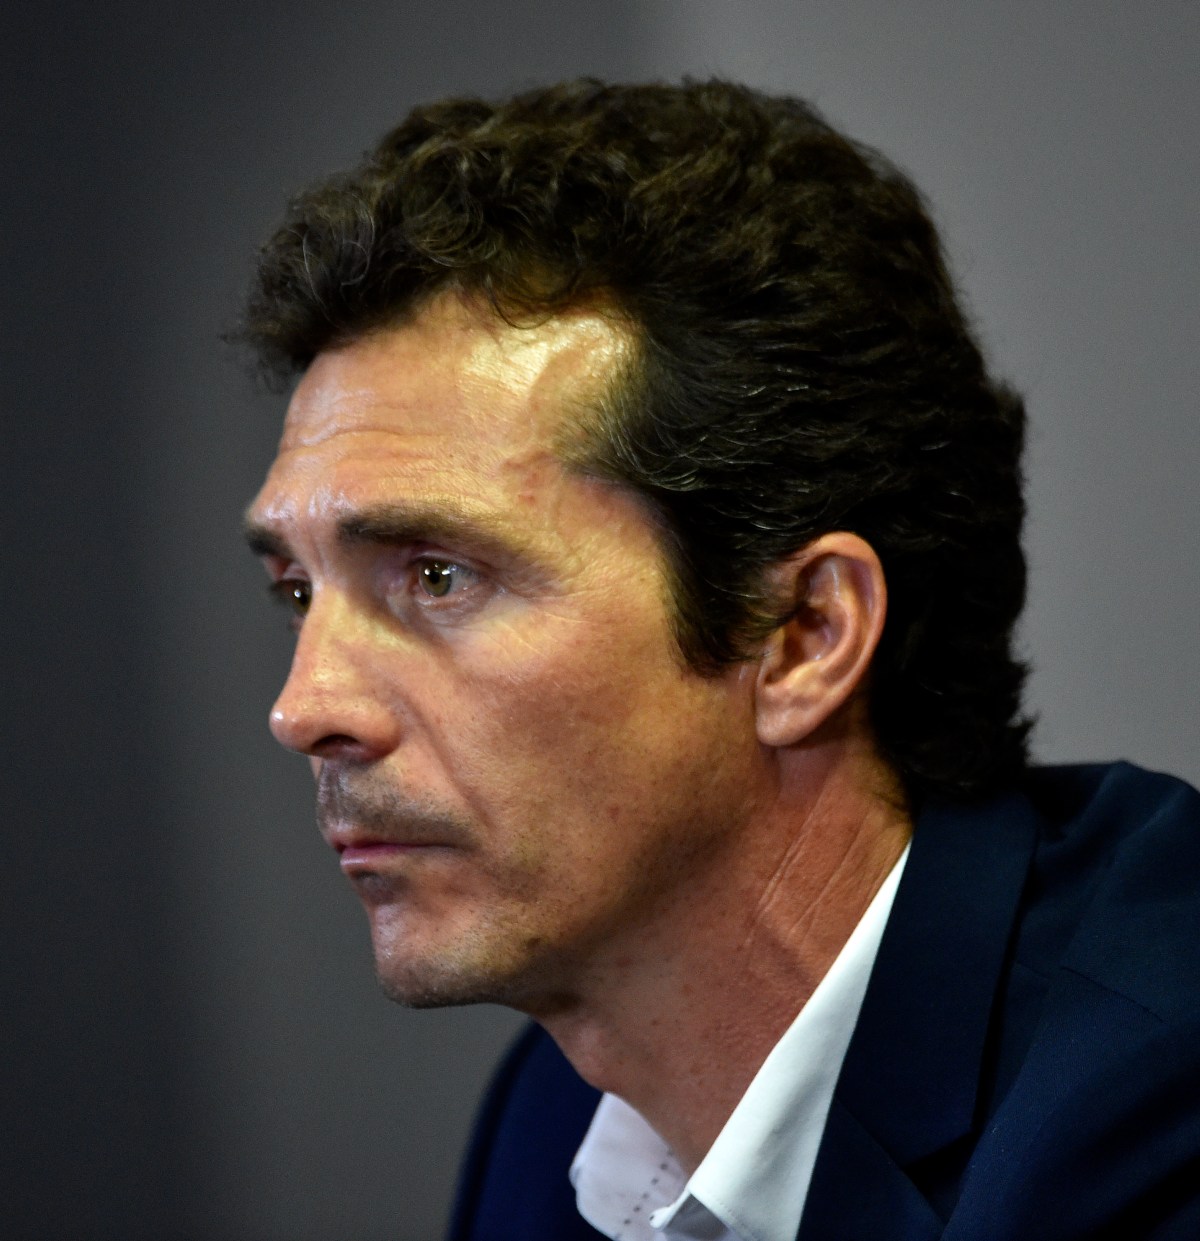 Adelaide head coach Guillermo Amor during the round 2 A-League match between Adelaide United and the Western Sydney Wanderers at Coopers Stadium in Adelaide, Friday, Oct. 16, 2015. (AAP Image/David Mariuz) NO ARCHIVING, EDITORIAL USE